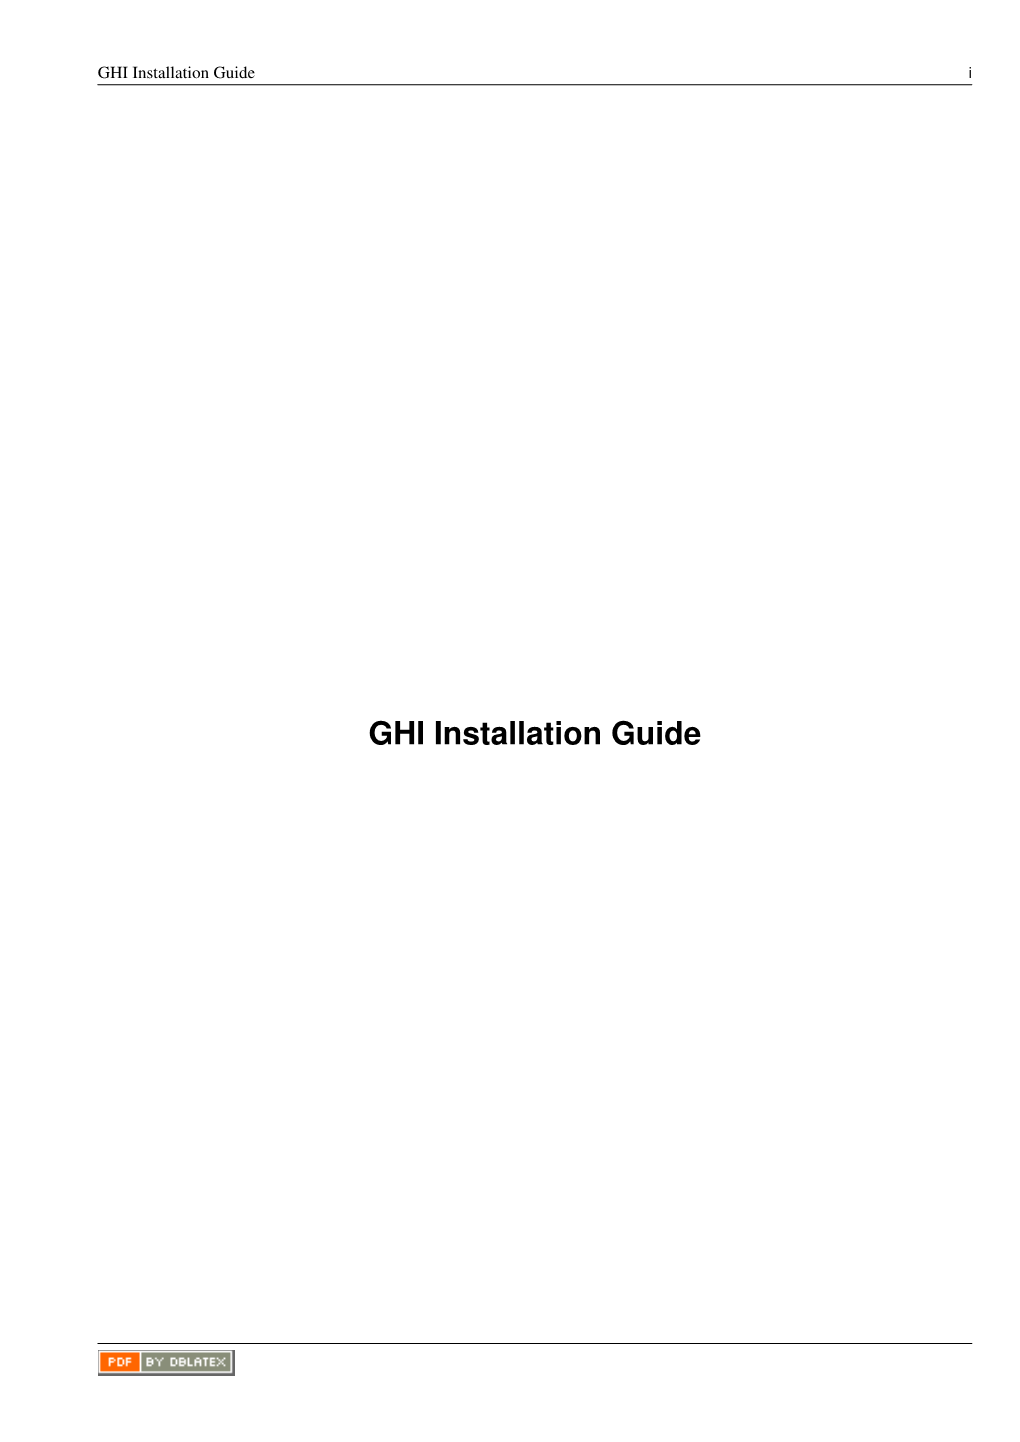 GHI Installation Guide I